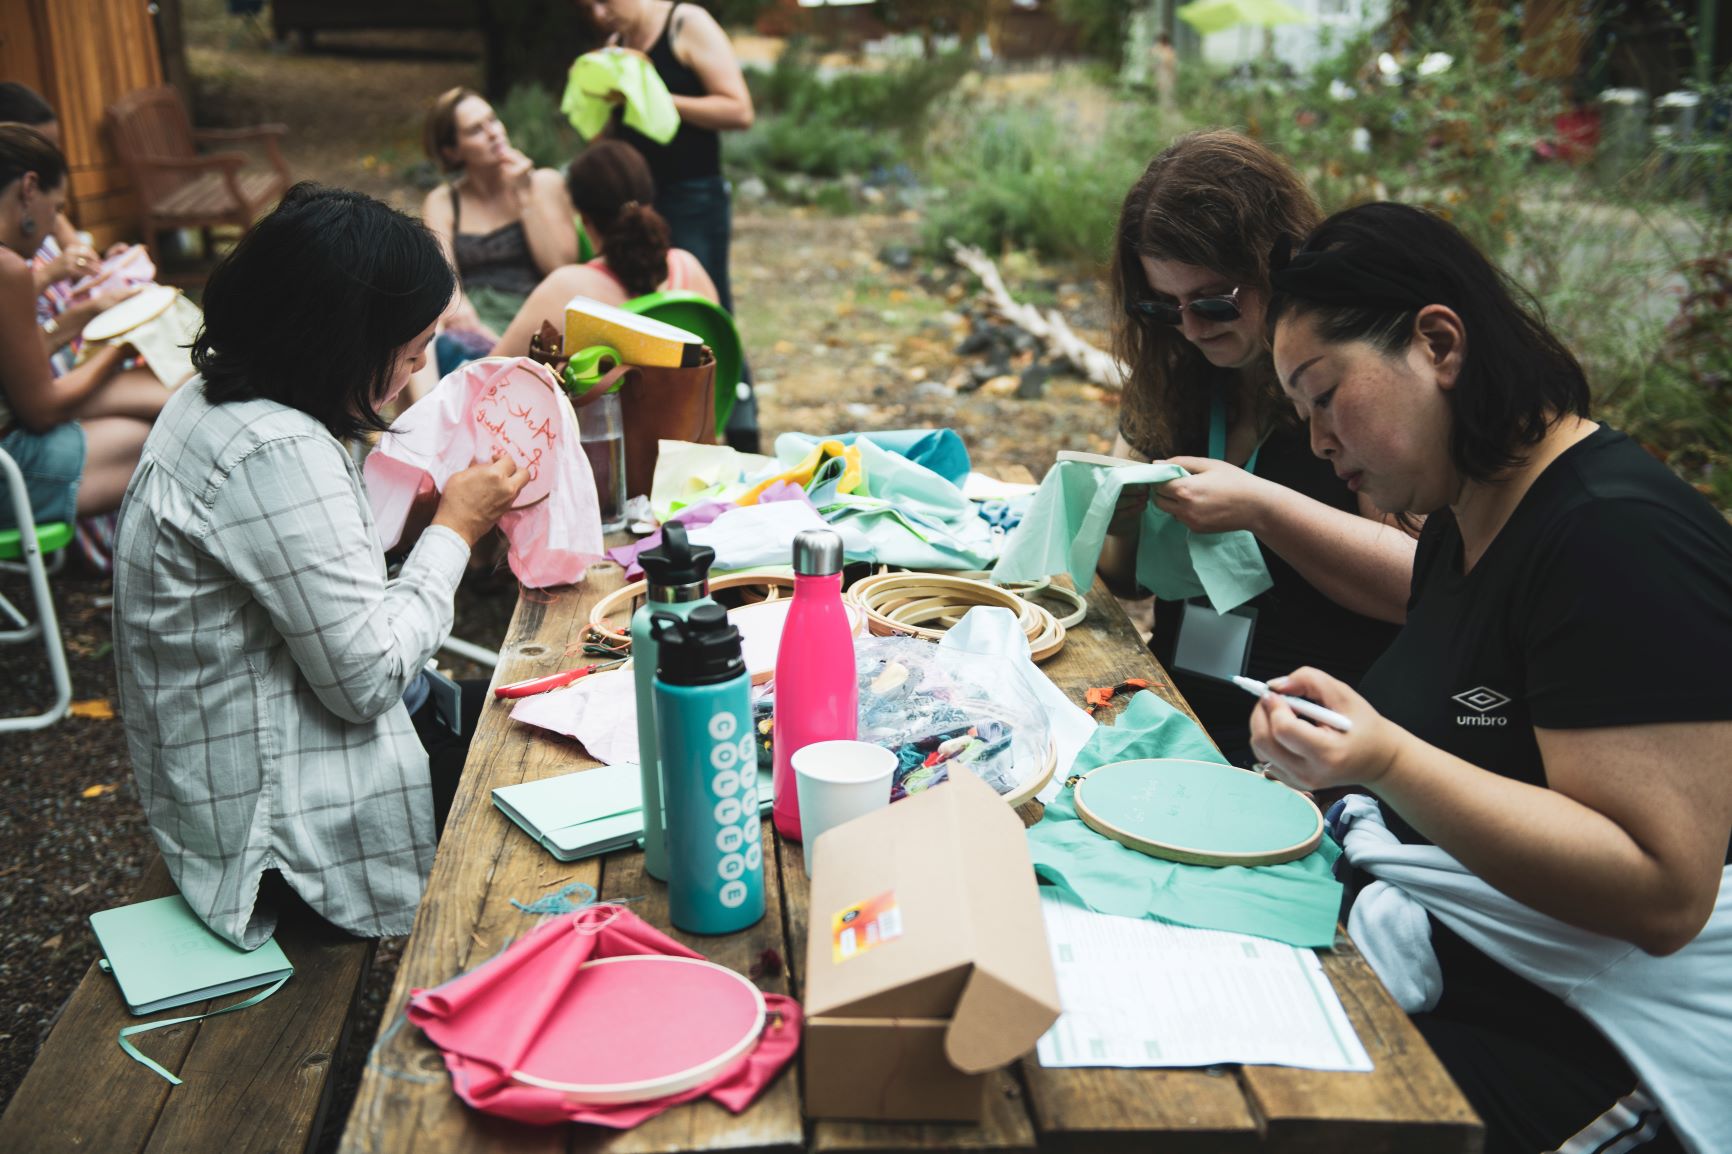 group of people sitting around a table outdoors working on embroidery projects